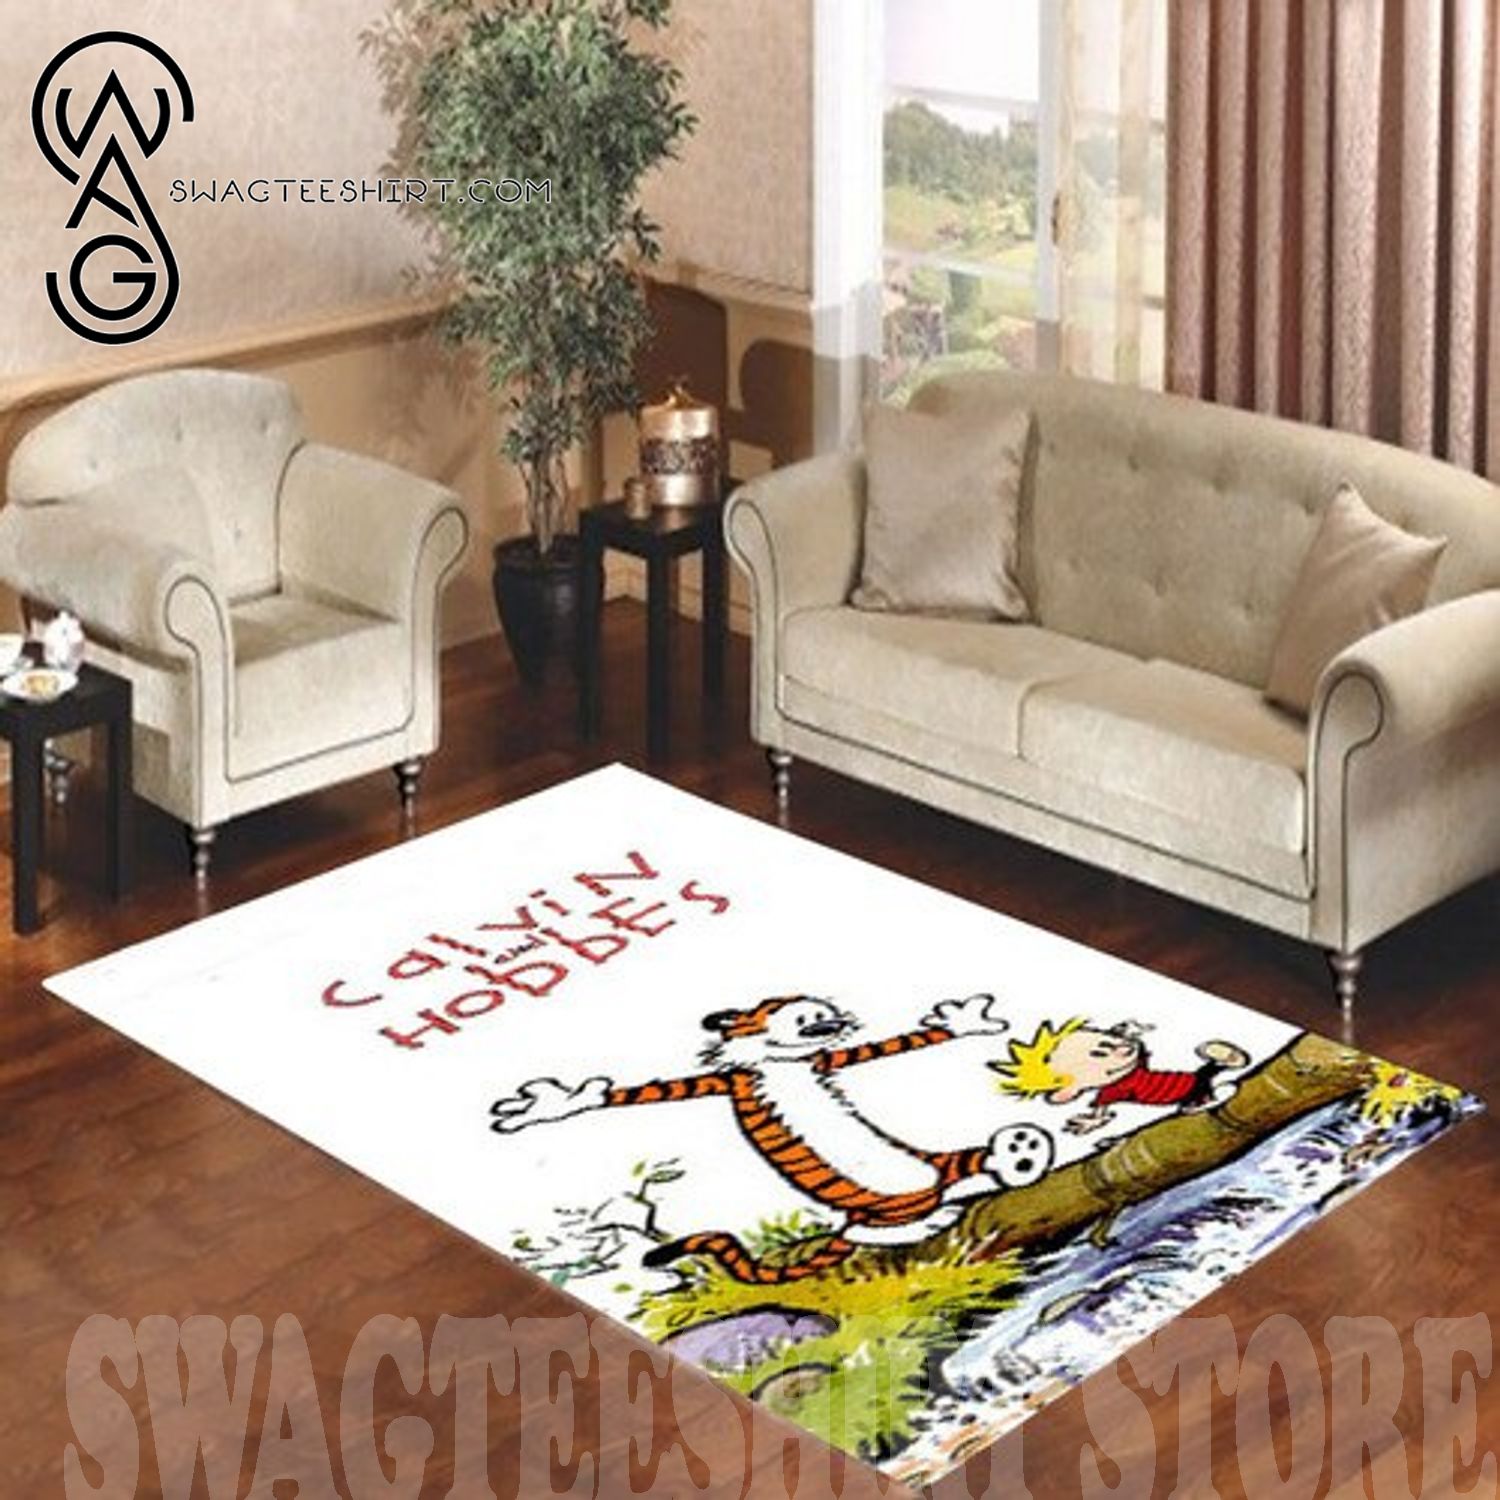 High quality] Calvin and Hobbes Living Room Carpet Rugs 607